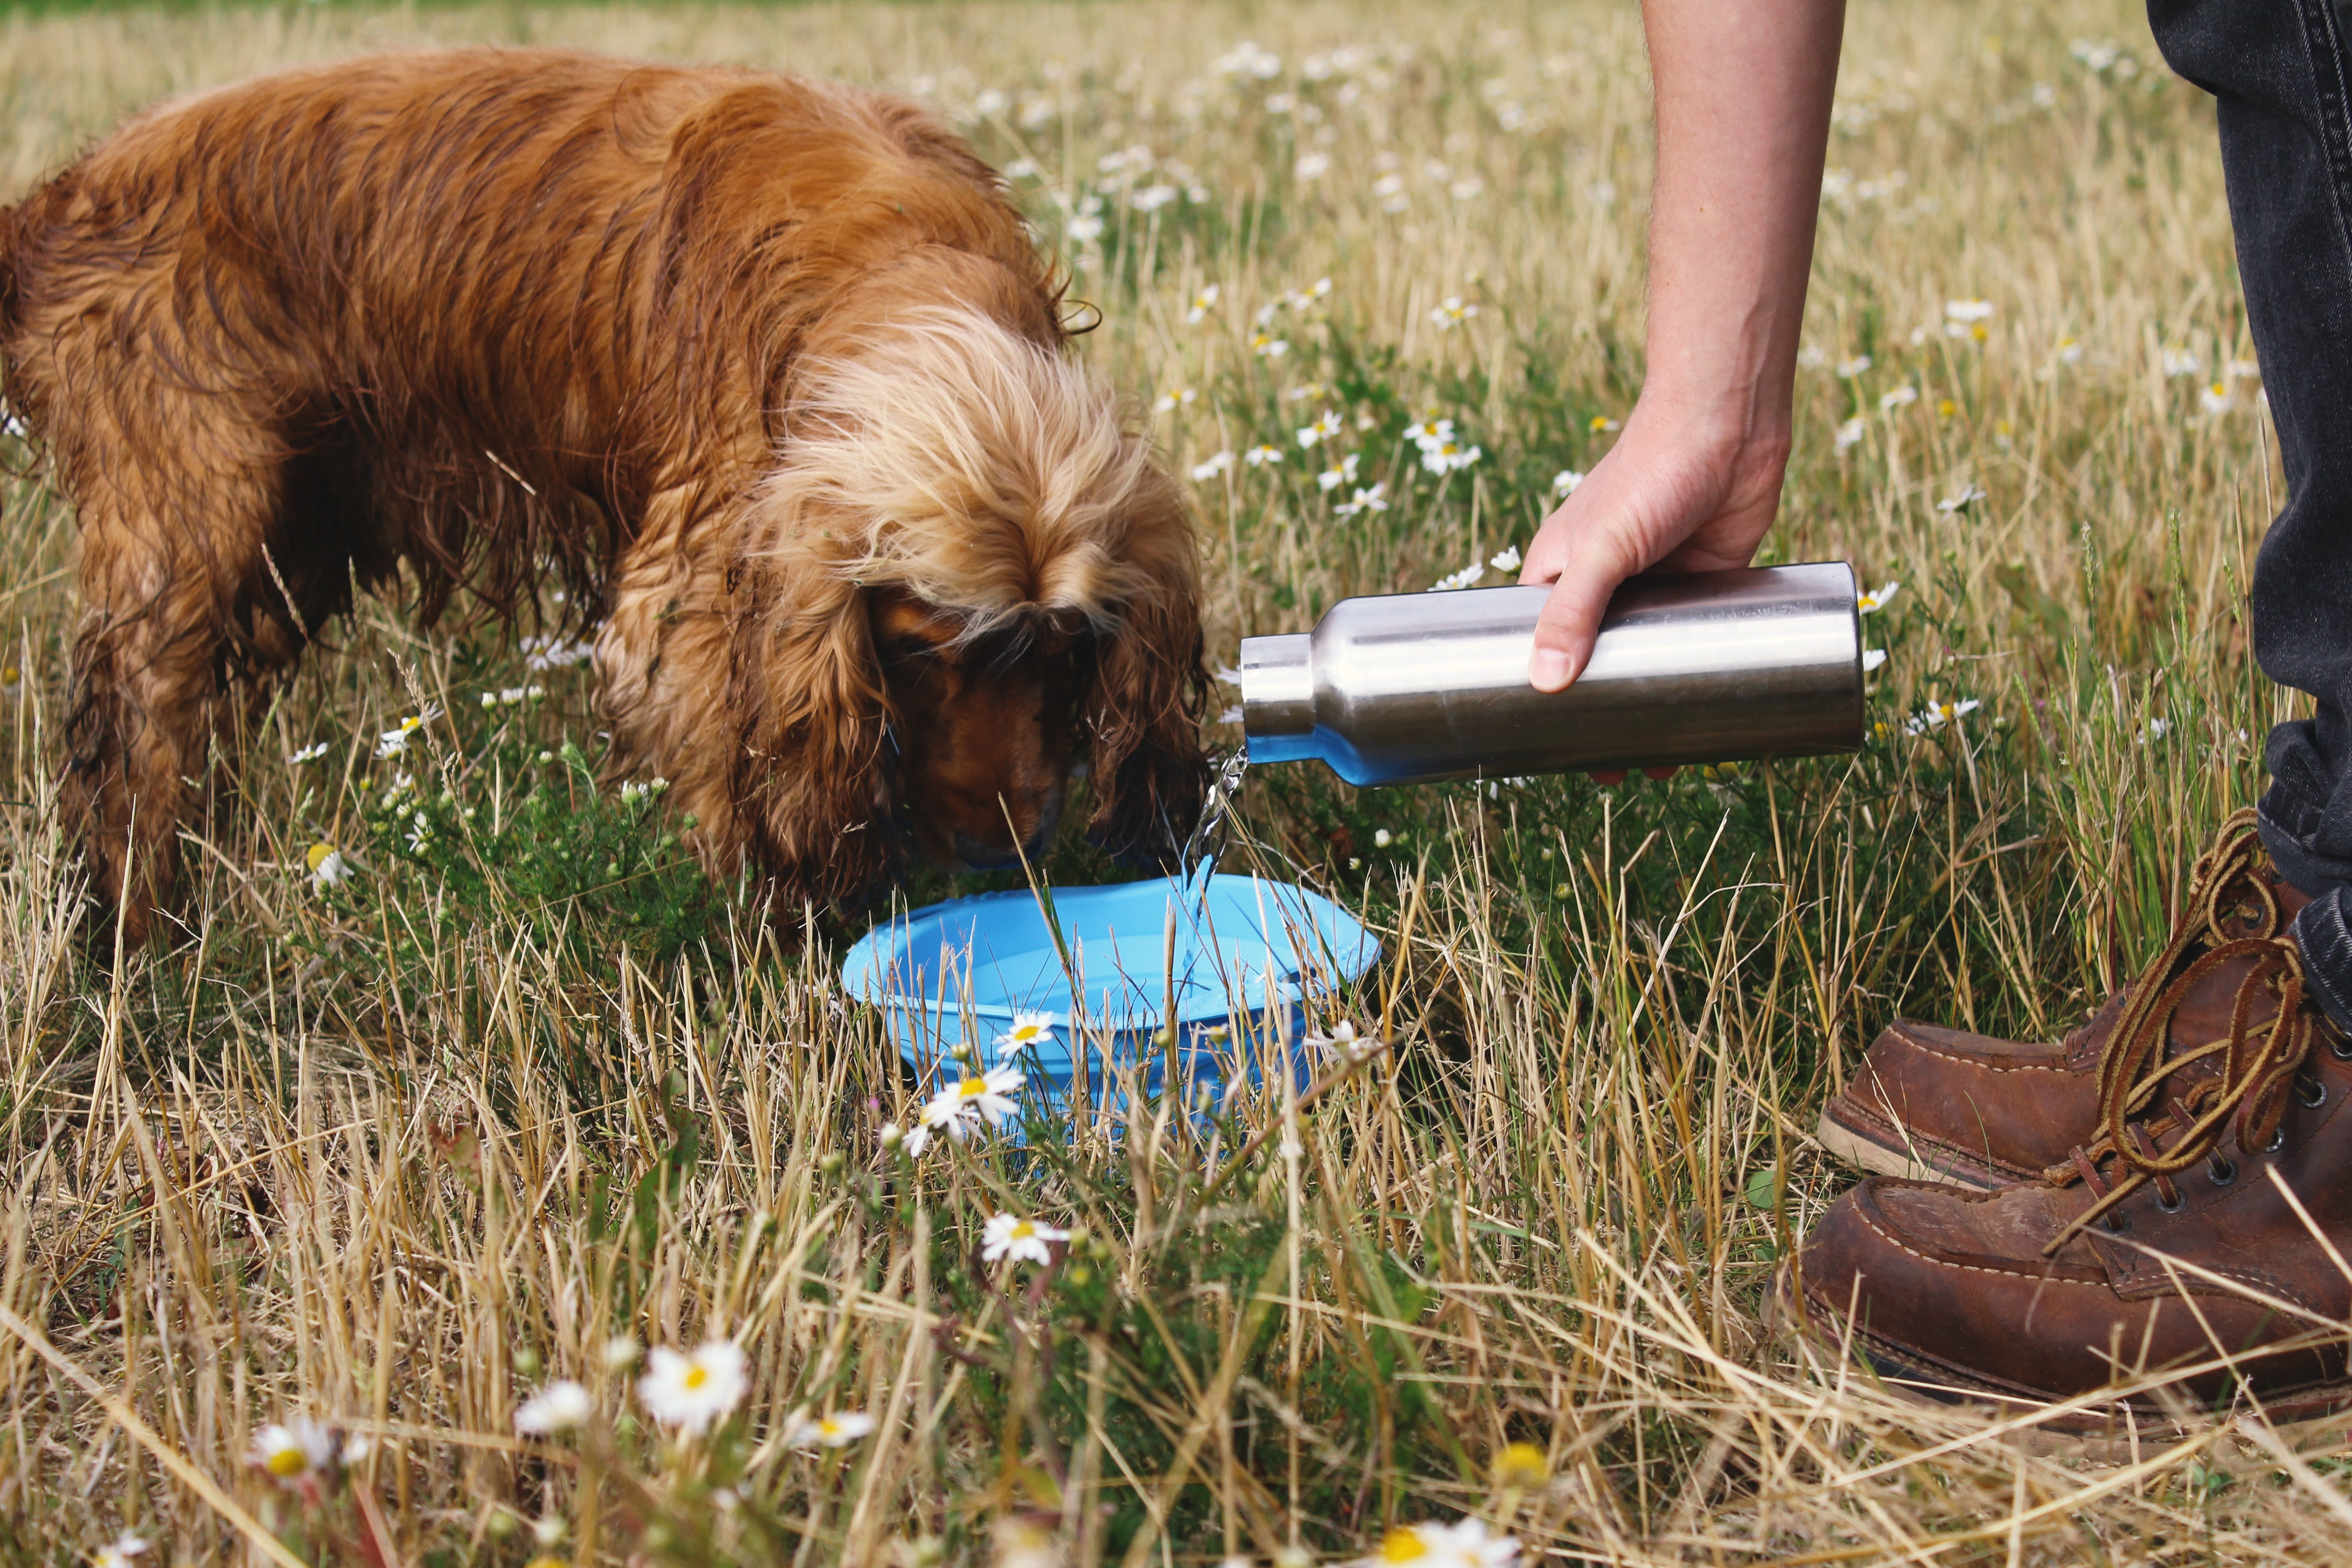 what to feed a dog to firm up stool